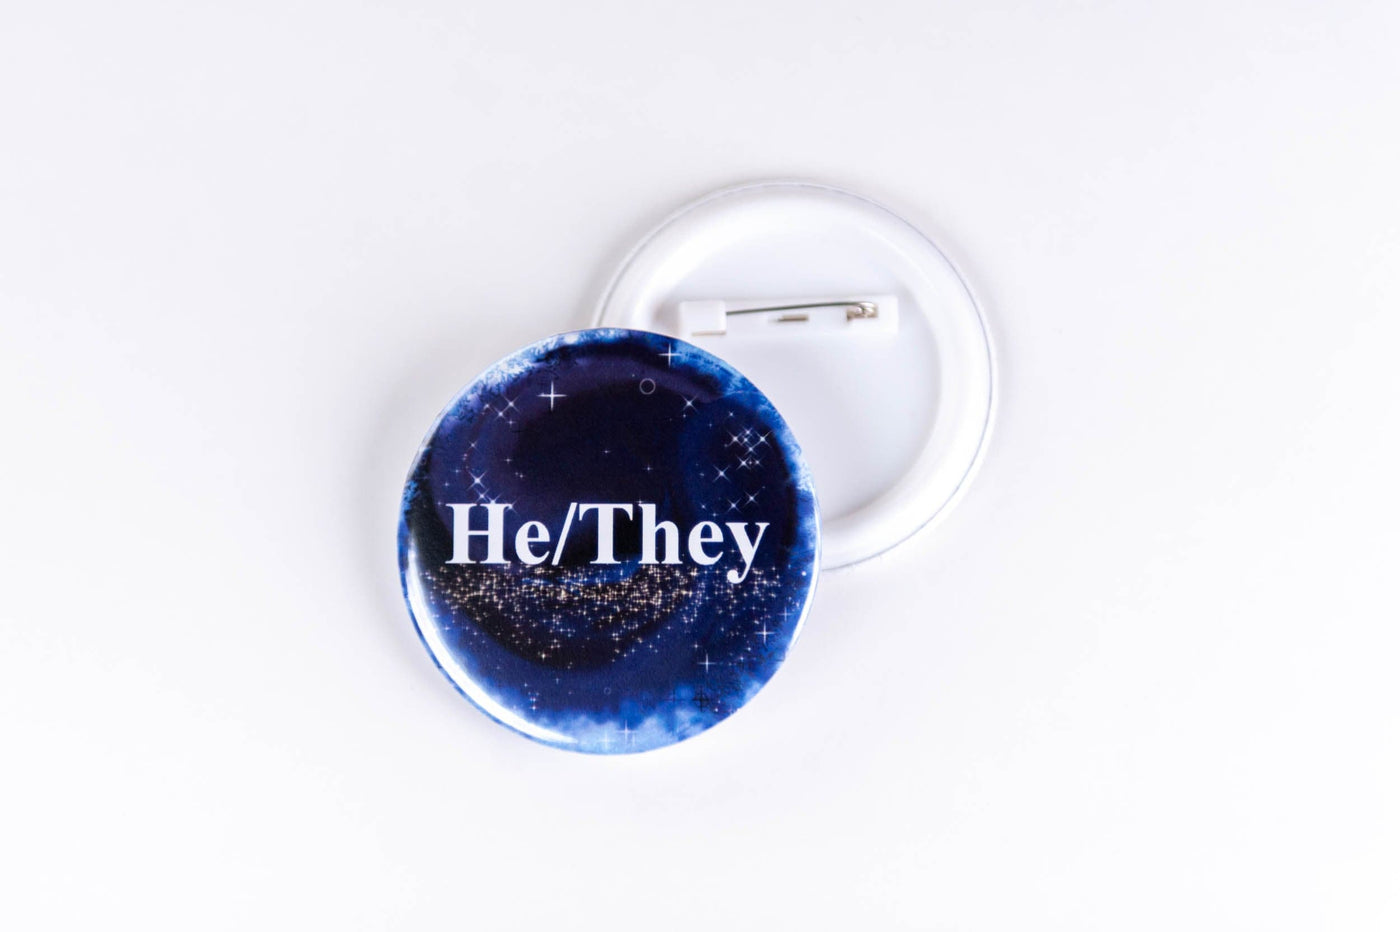 Accessory Pride Pronoun LGBT Pin Back Buttons by Princess Pumps He/They